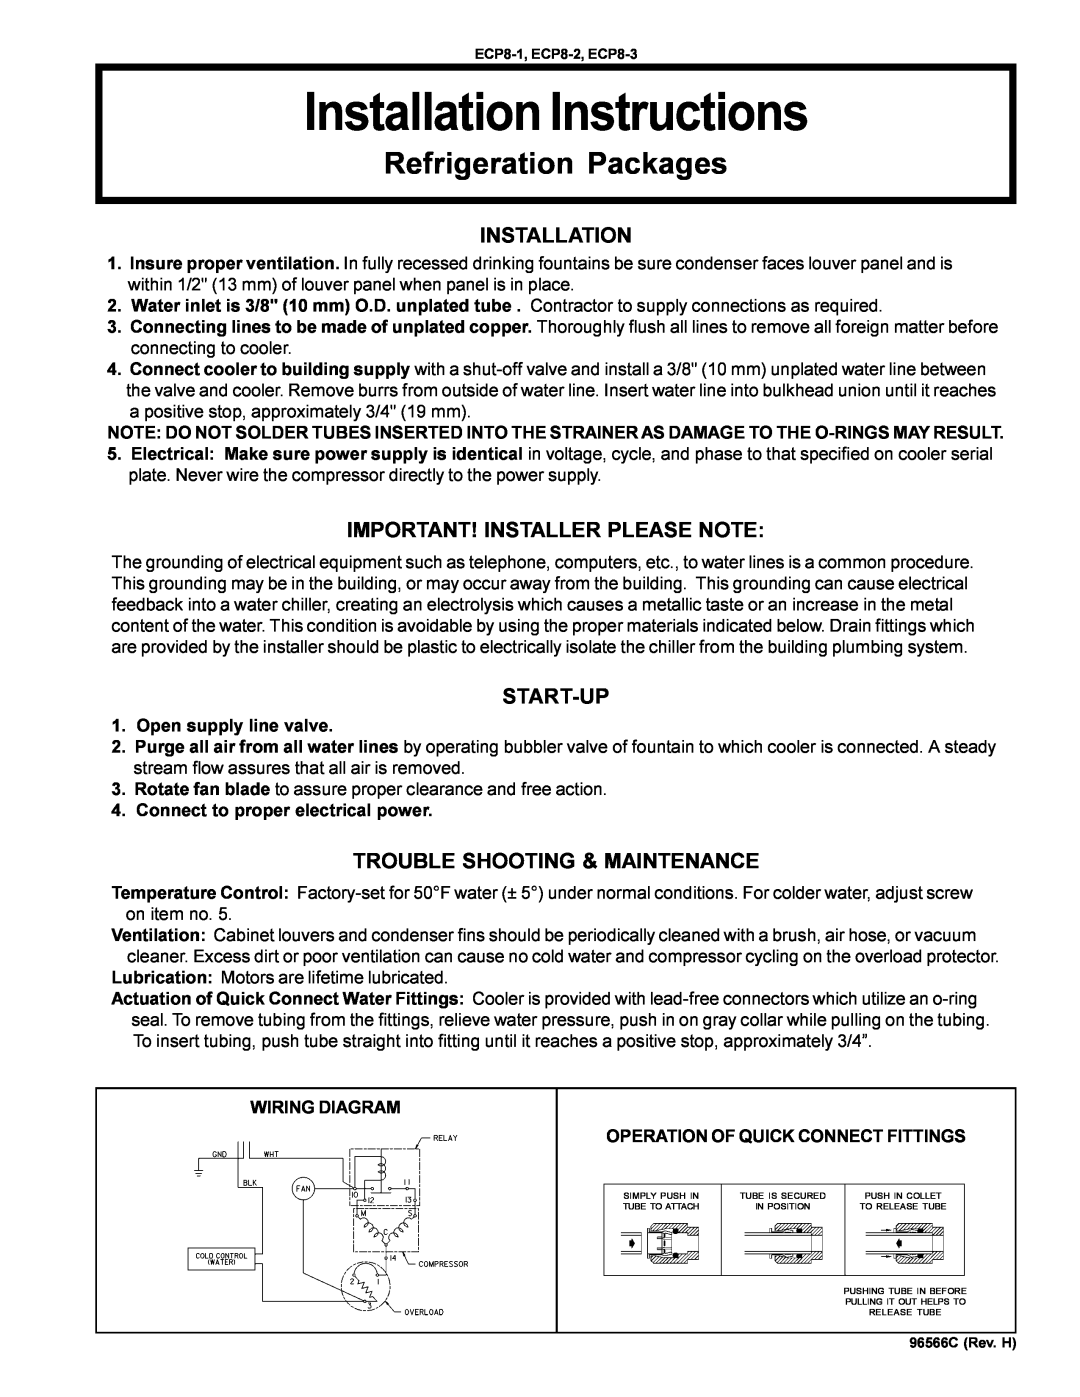 Elkay ECP8-1 installation instructions Installation Instructions, Refrigeration Packages, Important! Installer Please Note 